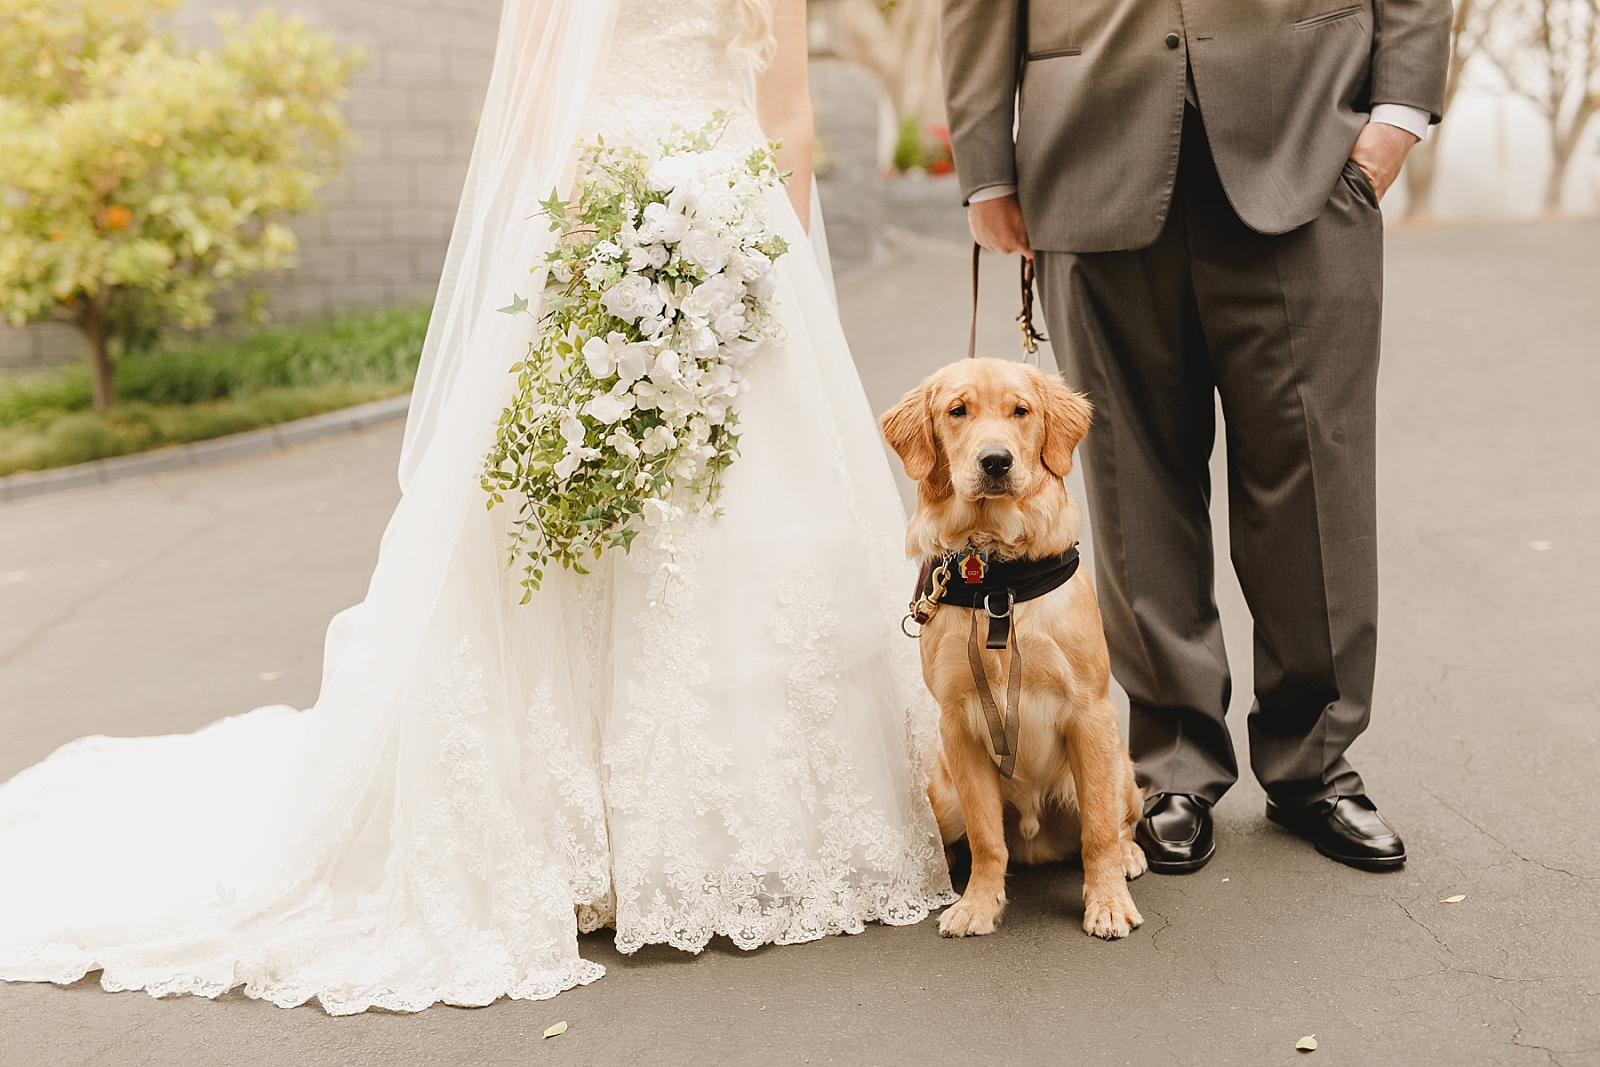 Dog in the wedding portaits